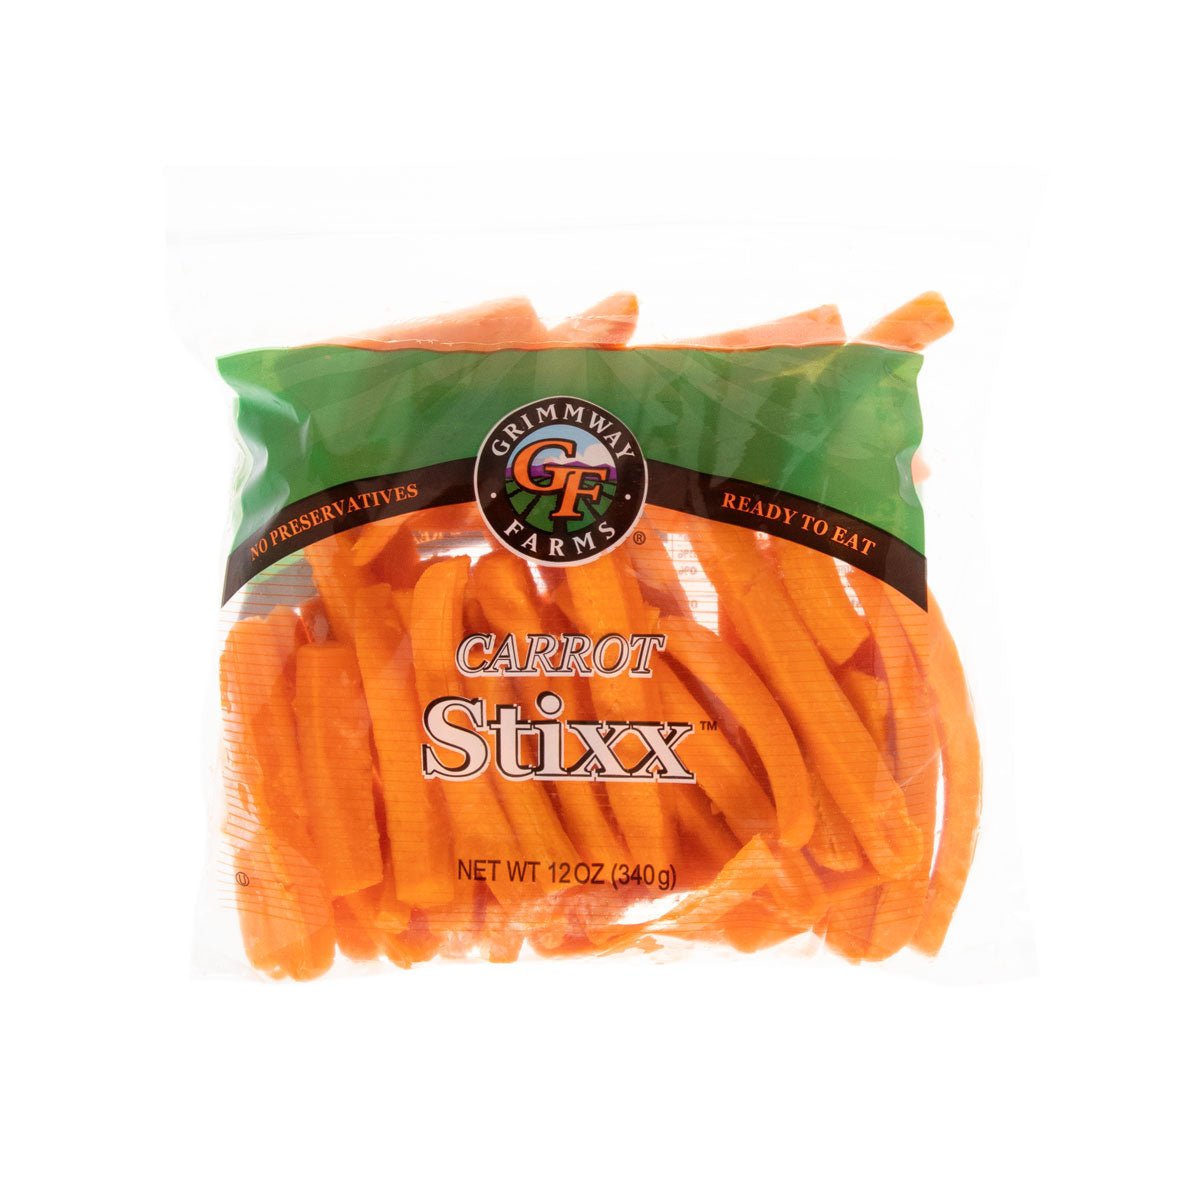 Grimmway Farms Carrot Sticks